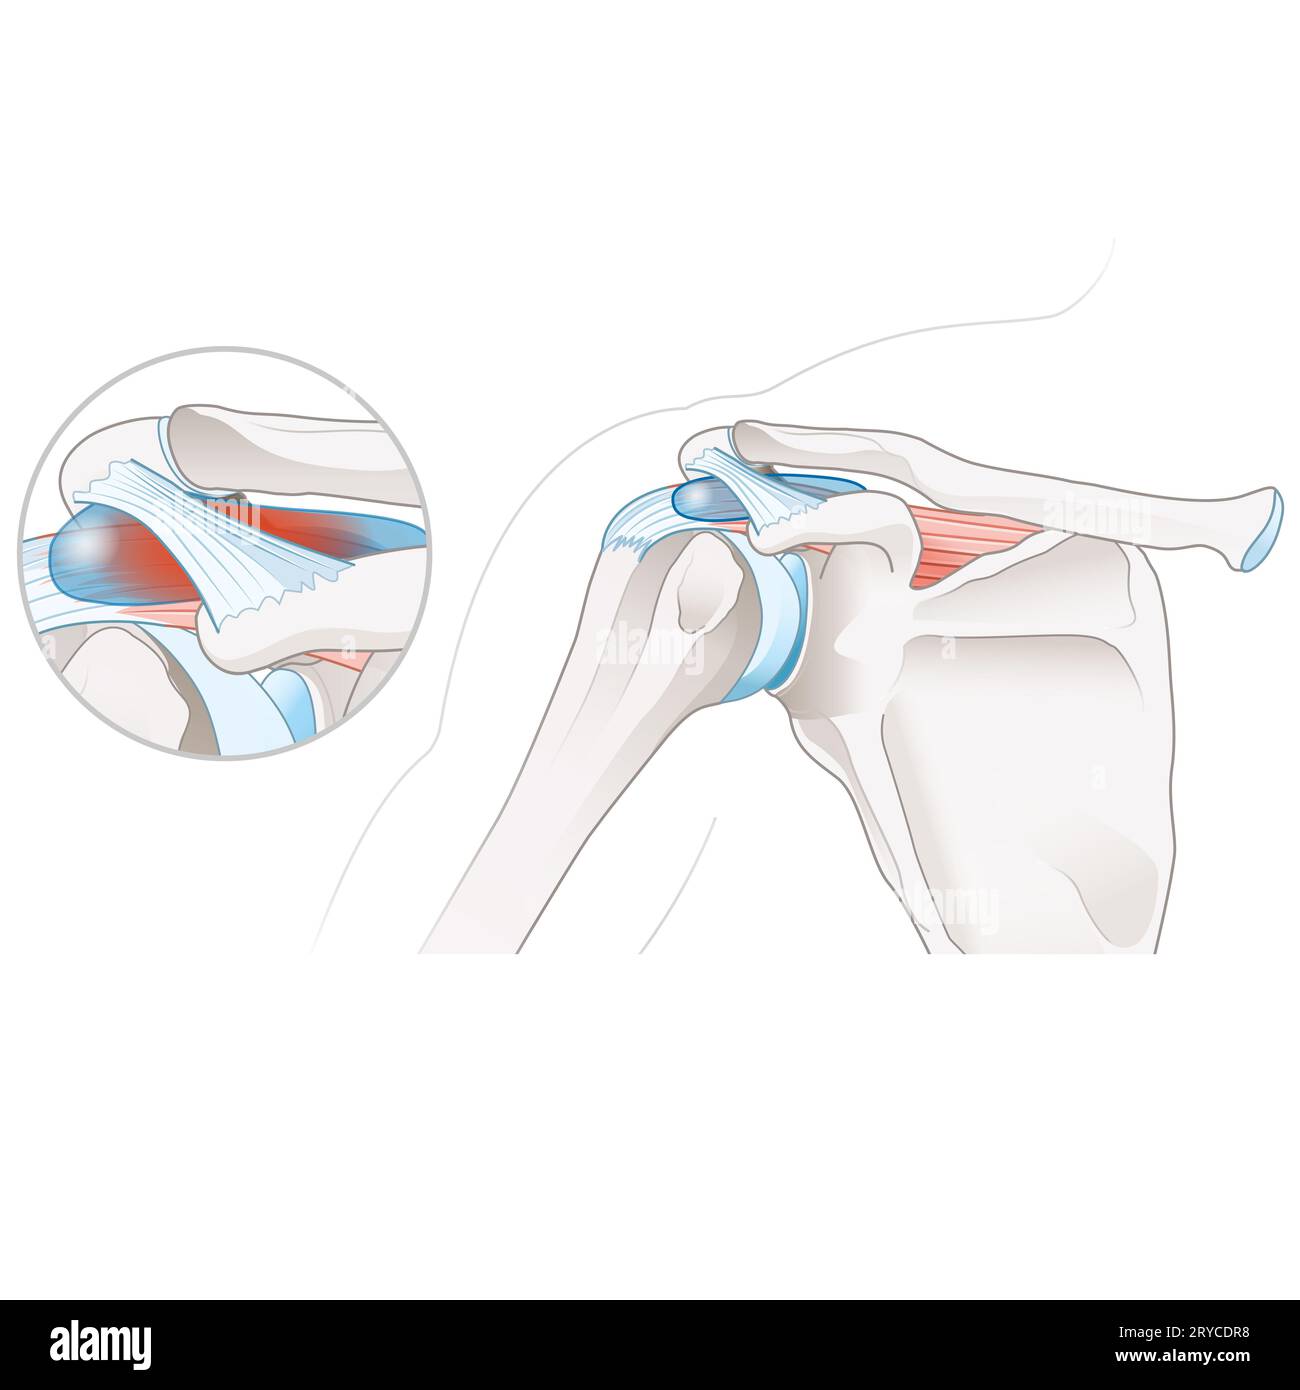 Subacromial bursitis is inflammation of the bursa in the shoulder, causing pain, swelling, and reduced mobility, often associated with rotator cuff is Stock Photo